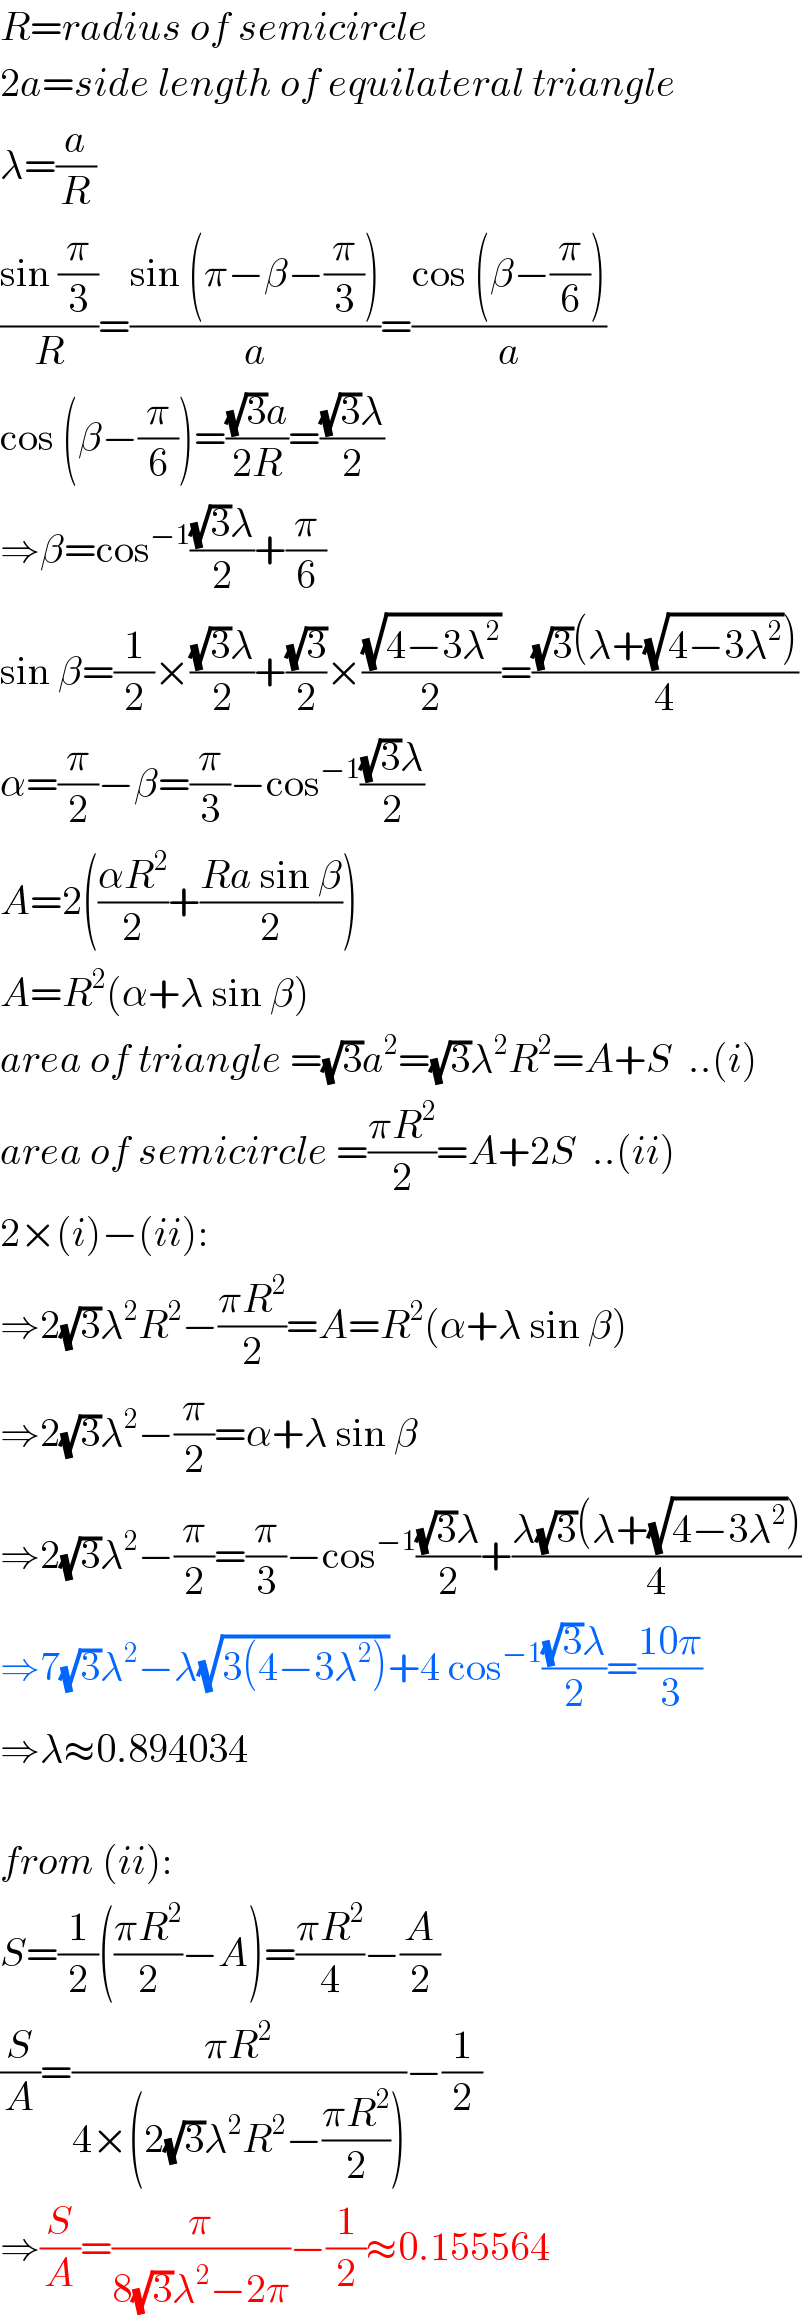 R=radius of semicircle  2a=side length of equilateral triangle  λ=(a/R)  ((sin (π/3))/R)=((sin (π−β−(π/3)))/a)=((cos (β−(π/6)))/a)  cos (β−(π/6))=(((√3)a)/(2R))=(((√3)λ)/2)  ⇒β=cos^(−1) (((√3)λ)/2)+(π/6)  sin β=(1/2)×(((√3)λ)/2)+((√3)/2)×((√(4−3λ^2 ))/2)=(((√3)(λ+(√(4−3λ^2 ))))/4)  α=(π/2)−β=(π/3)−cos^(−1) (((√3)λ)/2)  A=2(((αR^2 )/2)+((Ra sin β)/2))  A=R^2 (α+λ sin β)  area of triangle =(√3)a^2 =(√3)λ^2 R^2 =A+S  ..(i)  area of semicircle =((πR^2 )/2)=A+2S  ..(ii)  2×(i)−(ii):  ⇒2(√3)λ^2 R^2 −((πR^2 )/2)=A=R^2 (α+λ sin β)  ⇒2(√3)λ^2 −(π/2)=α+λ sin β  ⇒2(√3)λ^2 −(π/2)=(π/3)−cos^(−1) (((√3)λ)/2)+((λ(√3)(λ+(√(4−3λ^2 ))))/4)  ⇒7(√3)λ^2 −λ(√(3(4−3λ^2 )))+4 cos^(−1) (((√3)λ)/2)=((10π)/3)  ⇒λ≈0.894034    from (ii):  S=(1/2)(((πR^2 )/2)−A)=((πR^2 )/4)−(A/2)  (S/A)=((πR^2 )/(4×(2(√3)λ^2 R^2 −((πR^2 )/2))))−(1/2)  ⇒(S/A)=(π/(8(√3)λ^2 −2π))−(1/2)≈0.155564  